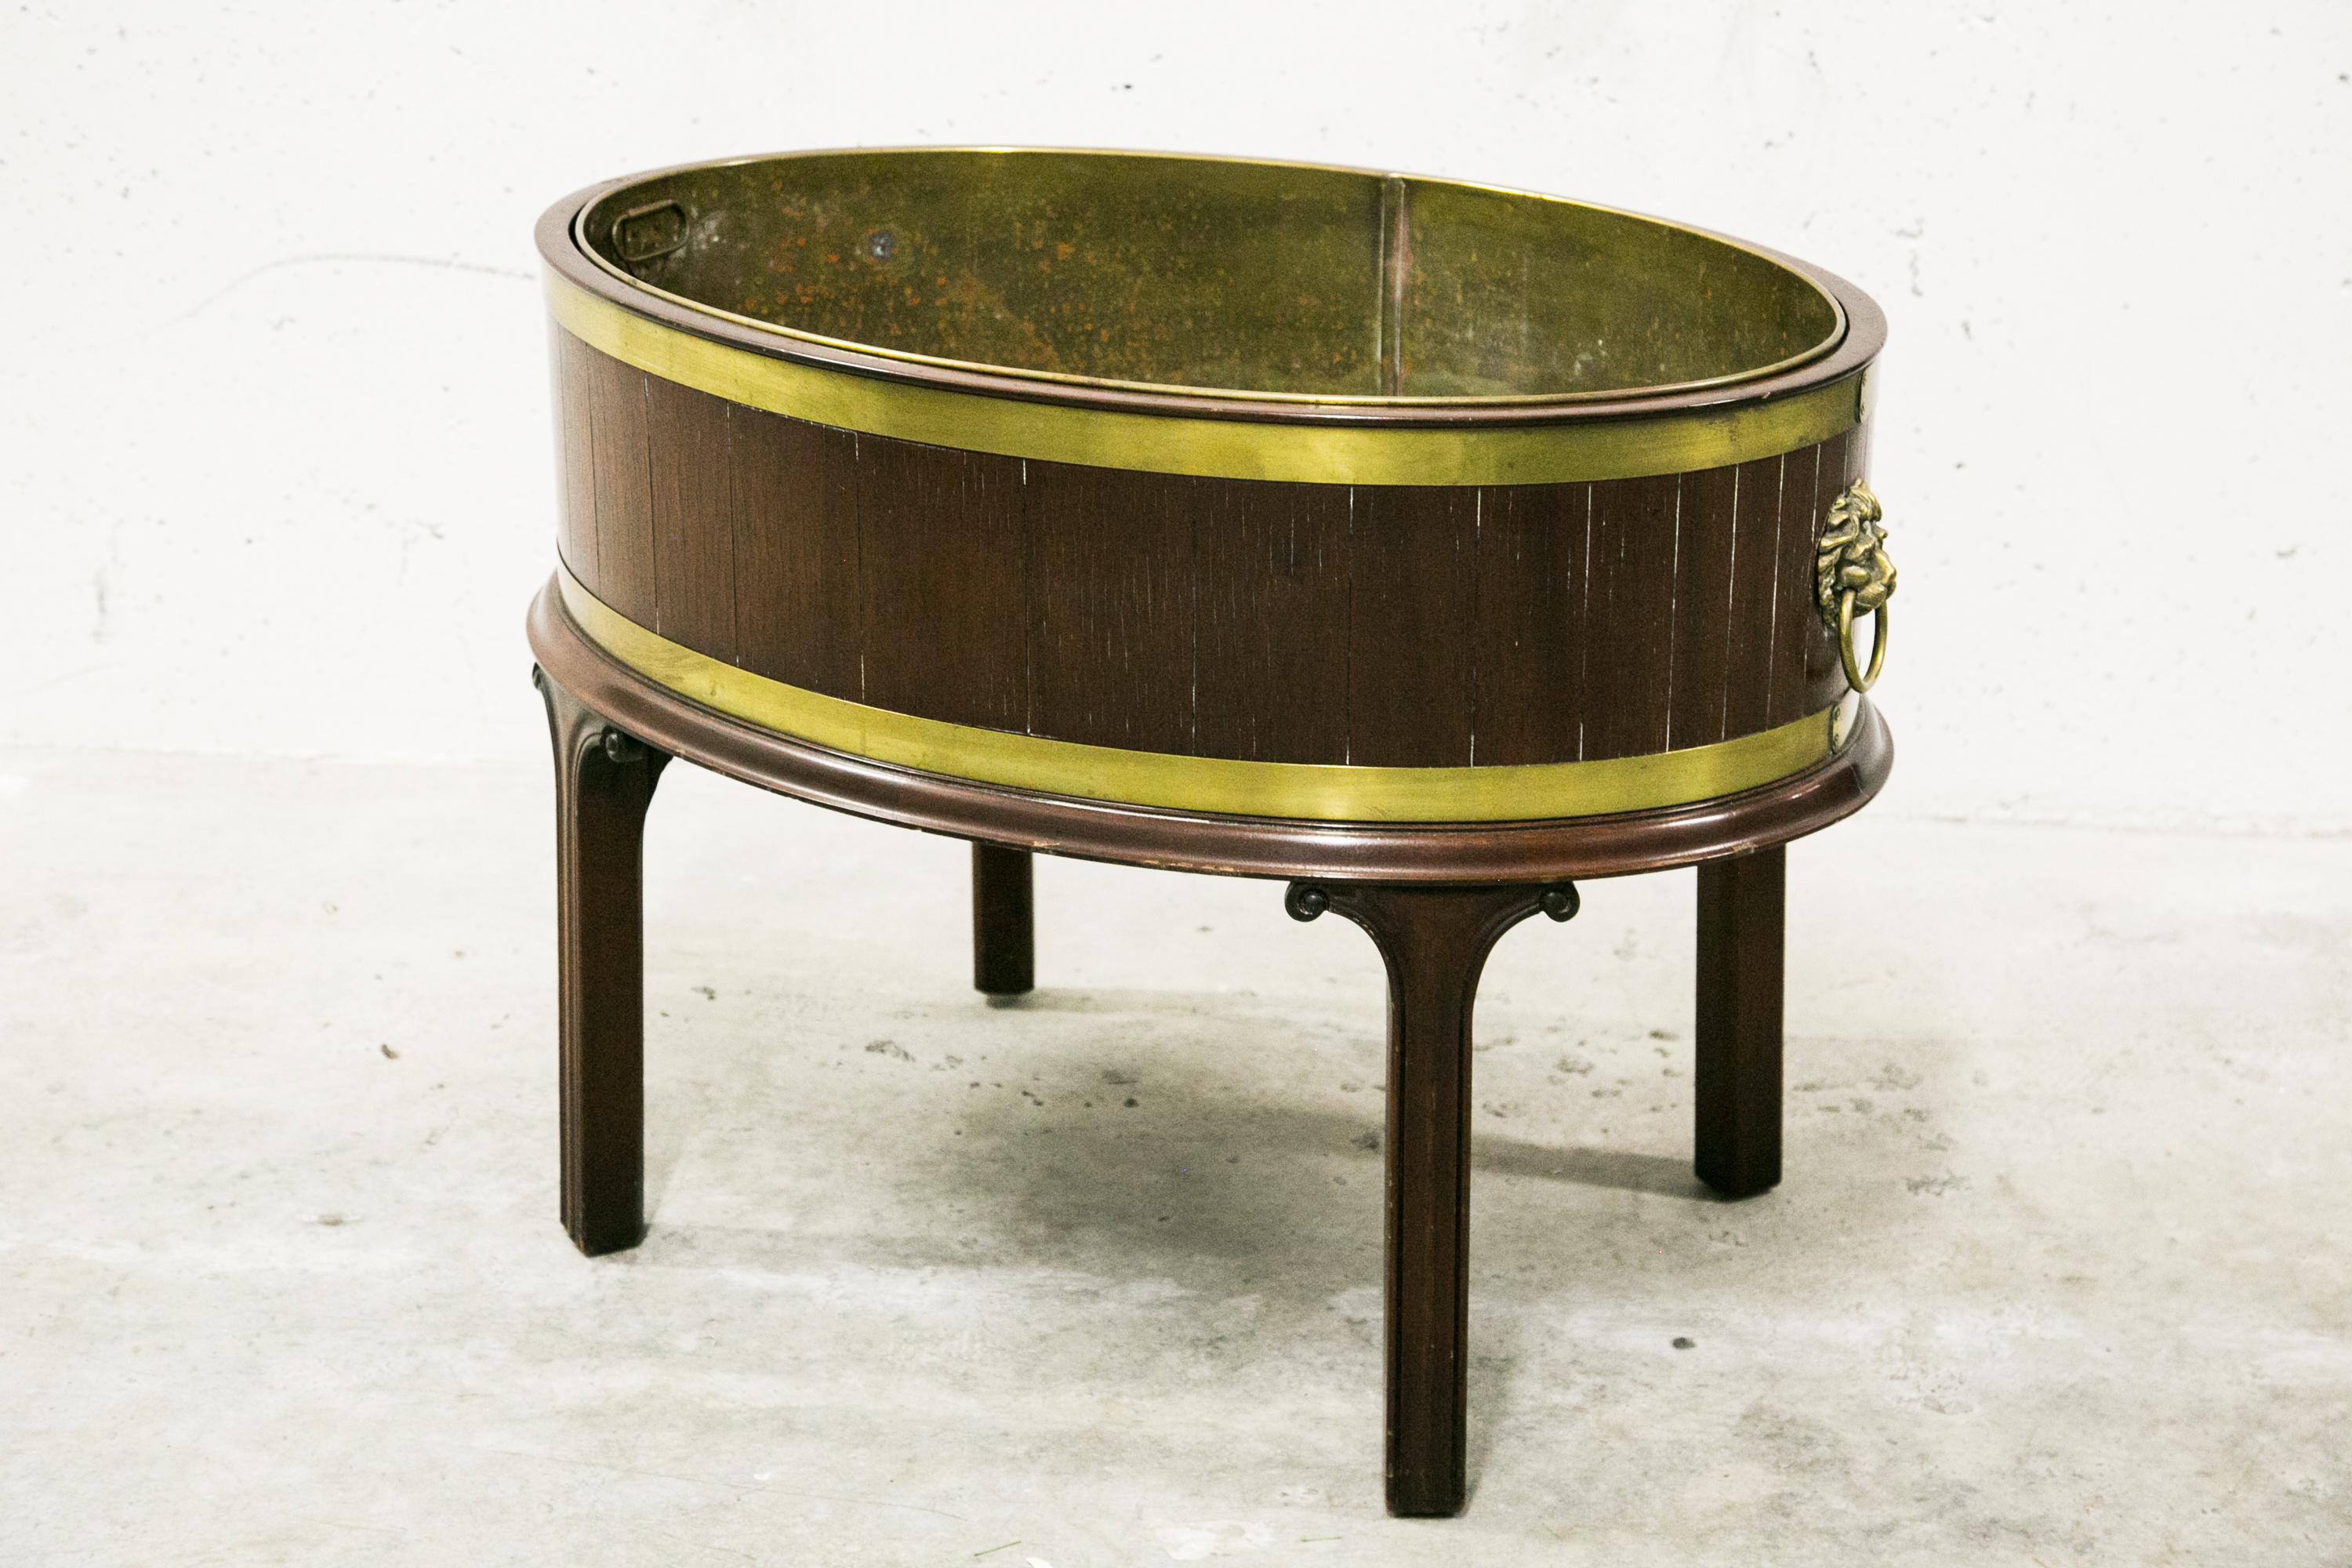 This is a classic oval English George III style period appropriate mahogany wine cooler. The exterior walls are constructed in vertical plank-forms bound together with upper and lower brass straps. The interior is metal lined. Brass lion’s head